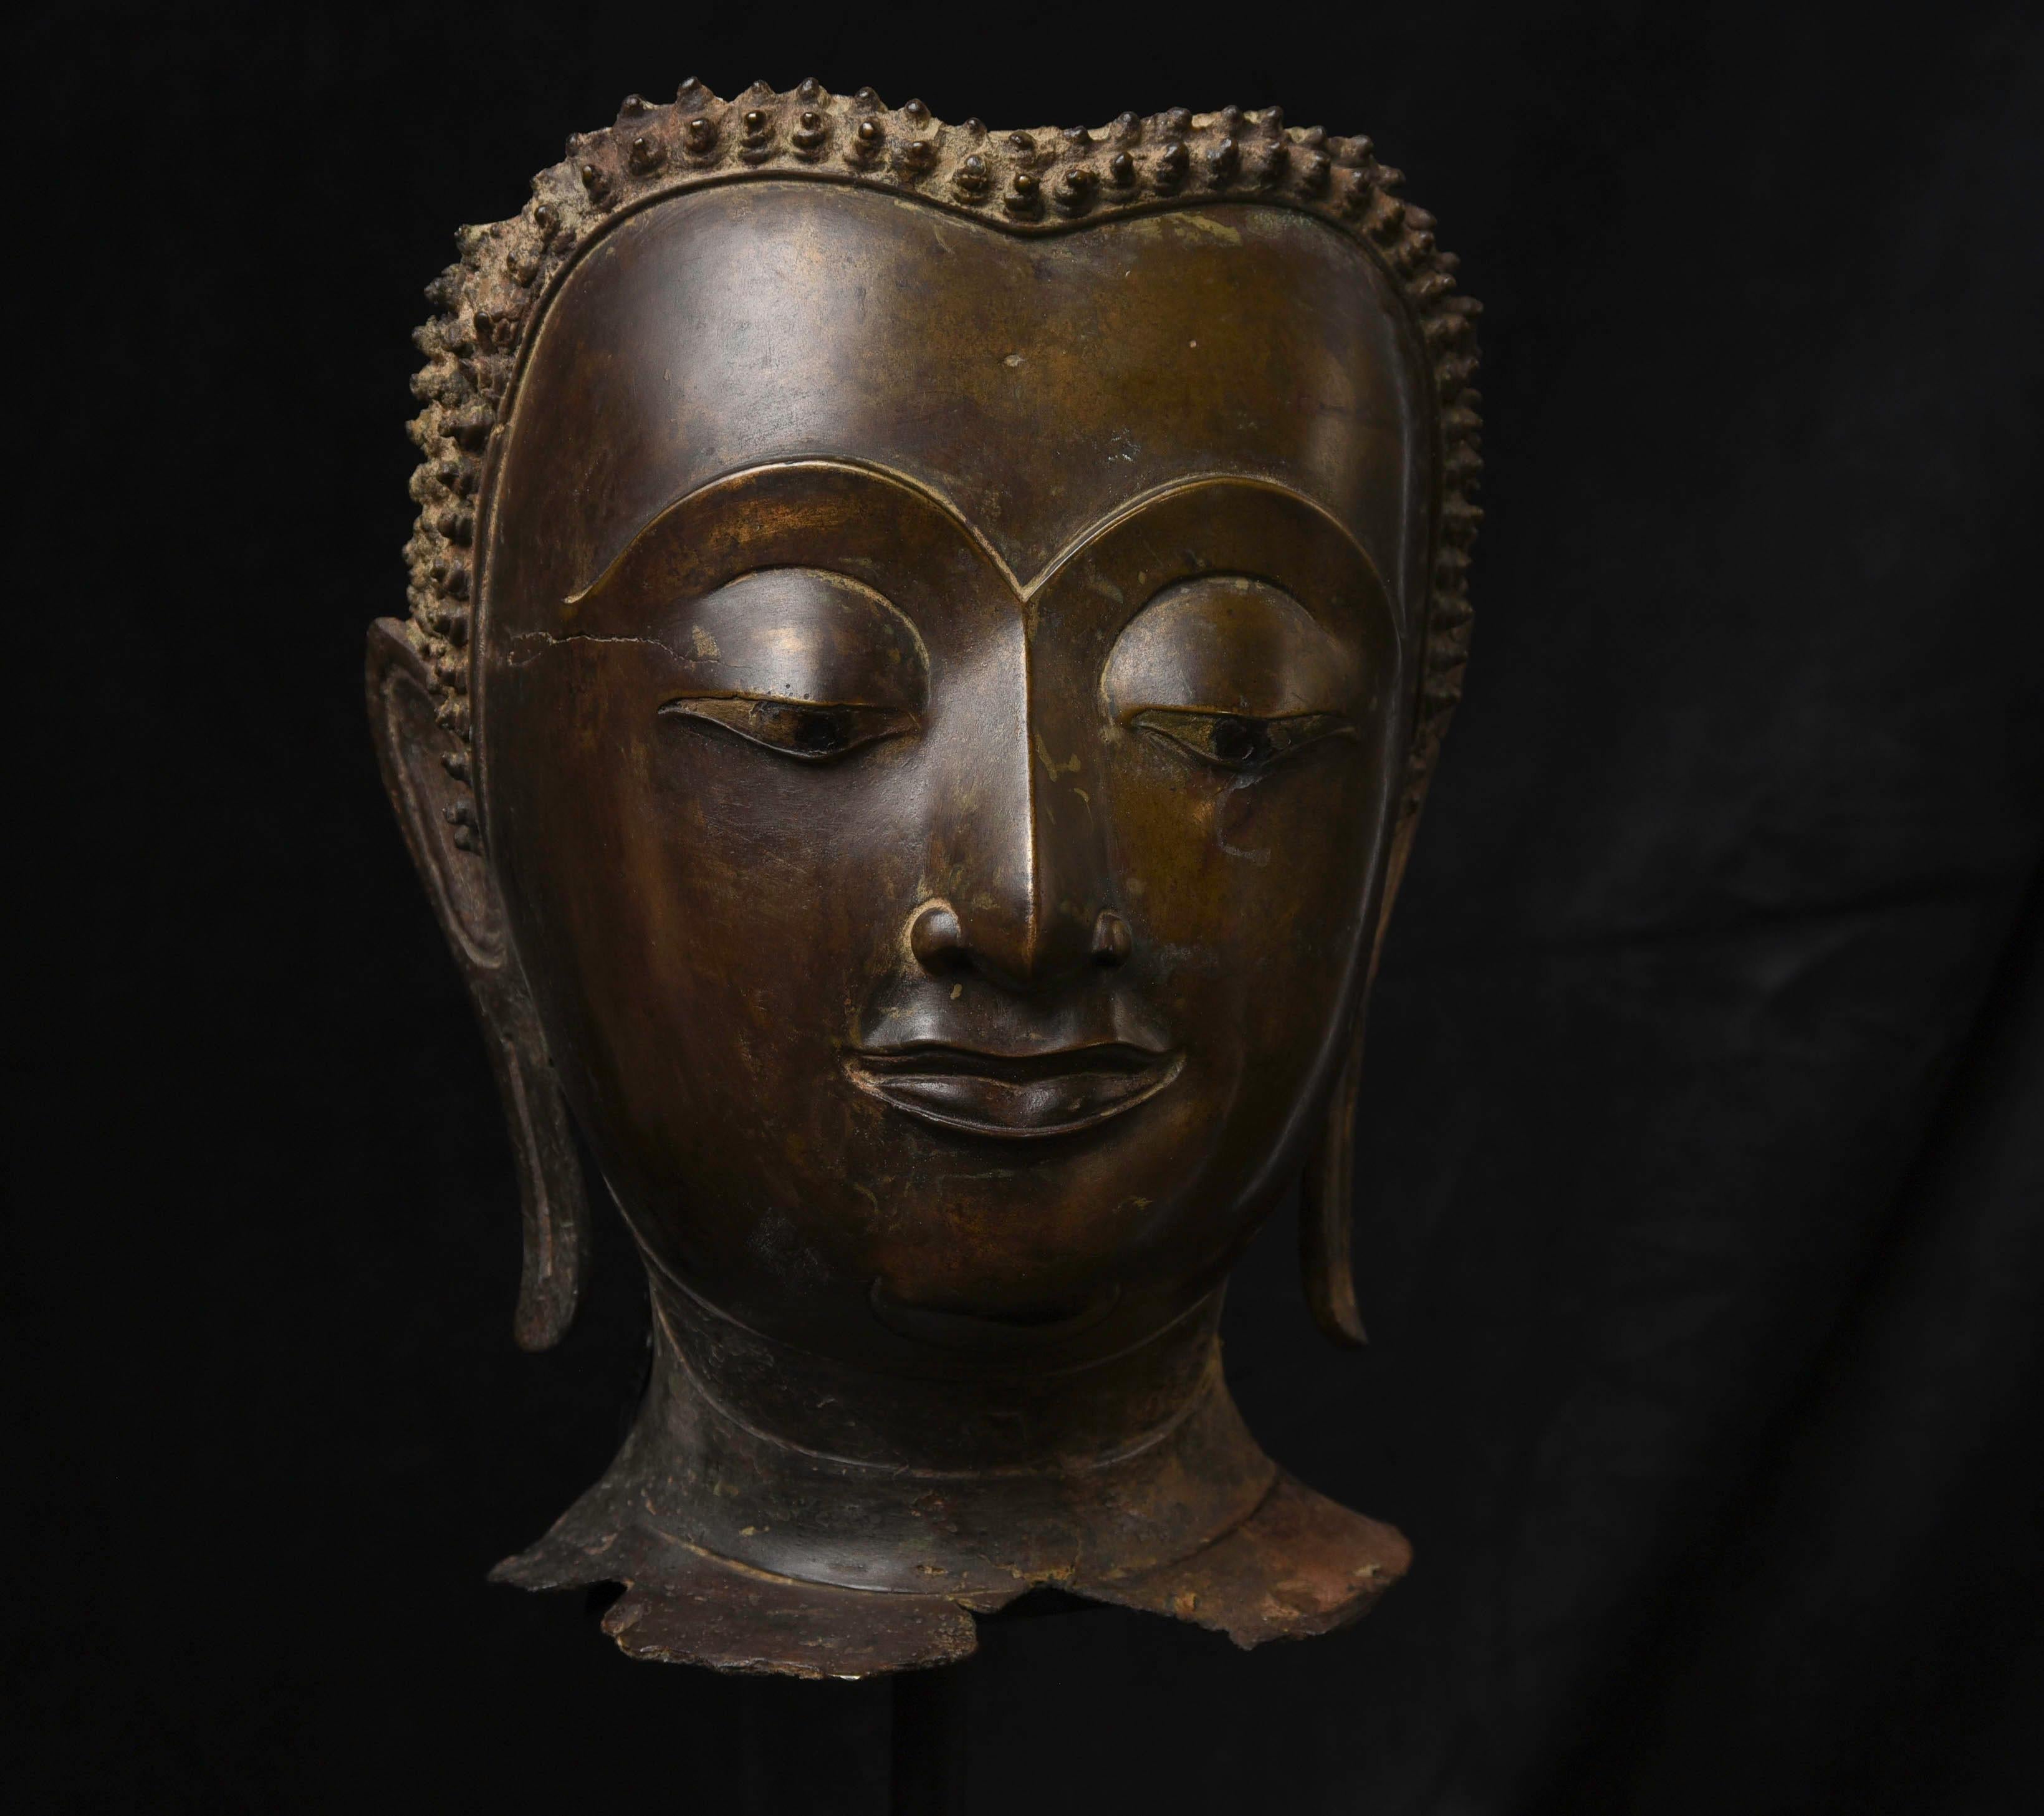 Magnificent 15thC Thai Buddha partial head, from a high-level or royal foundry. Originally part of a life-size Buddha that was cast in many parts. Even the head was cast in several parts- this was done in order to be able to gain the highest level